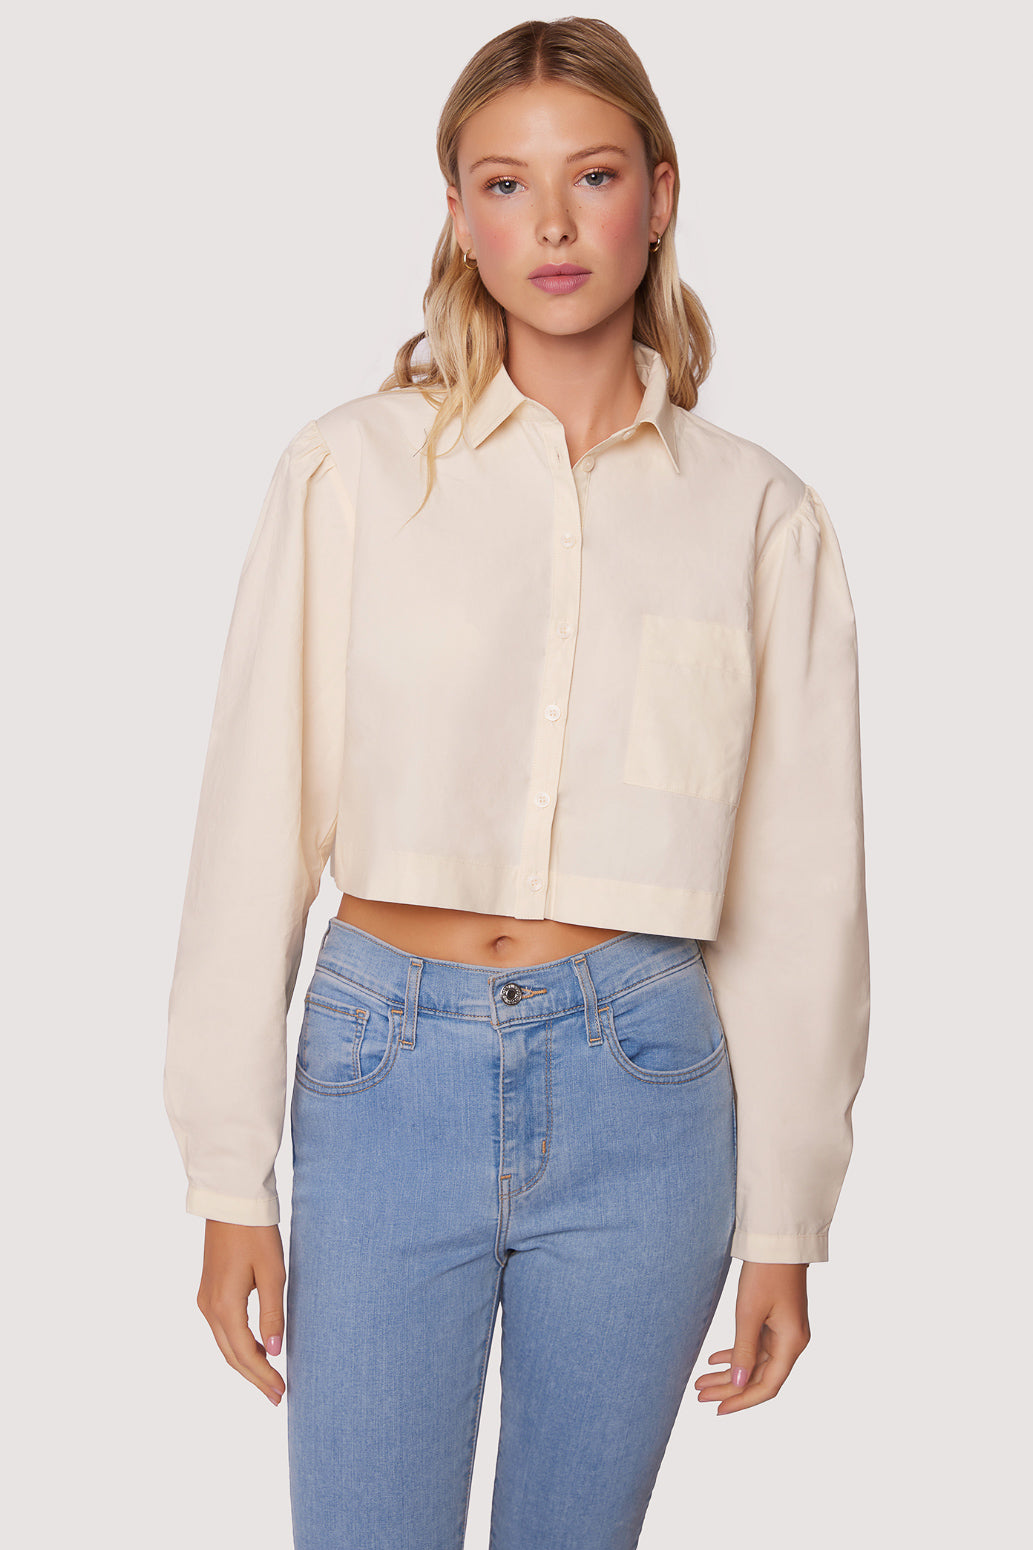 Sunny Business Boxy Crop Top